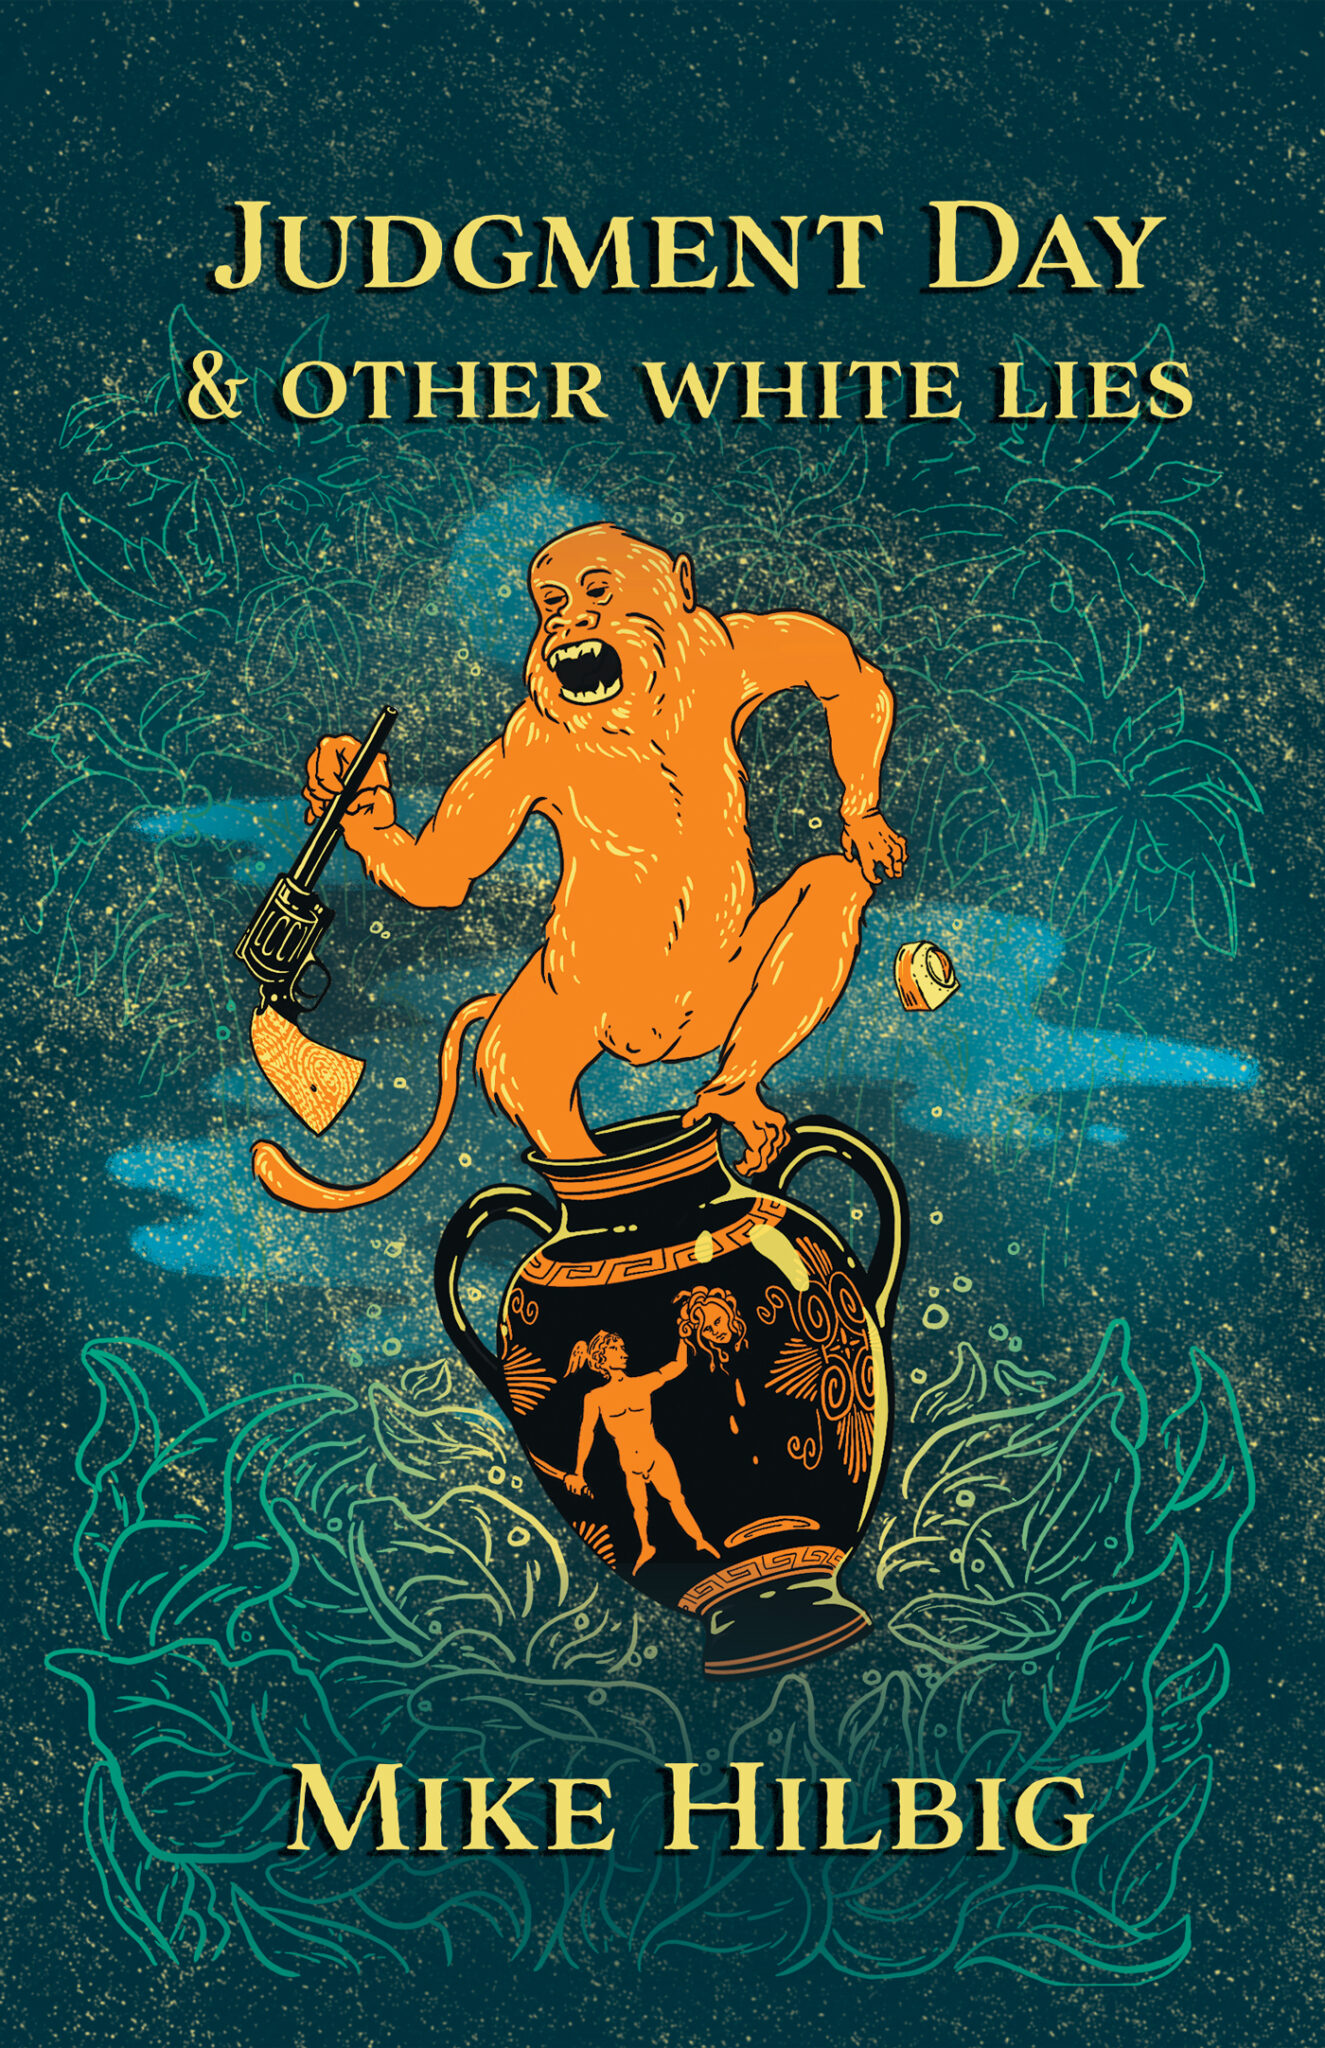 Cover of Judgement Day, featuring an orange monkey holding a gun balancing on an amphora.